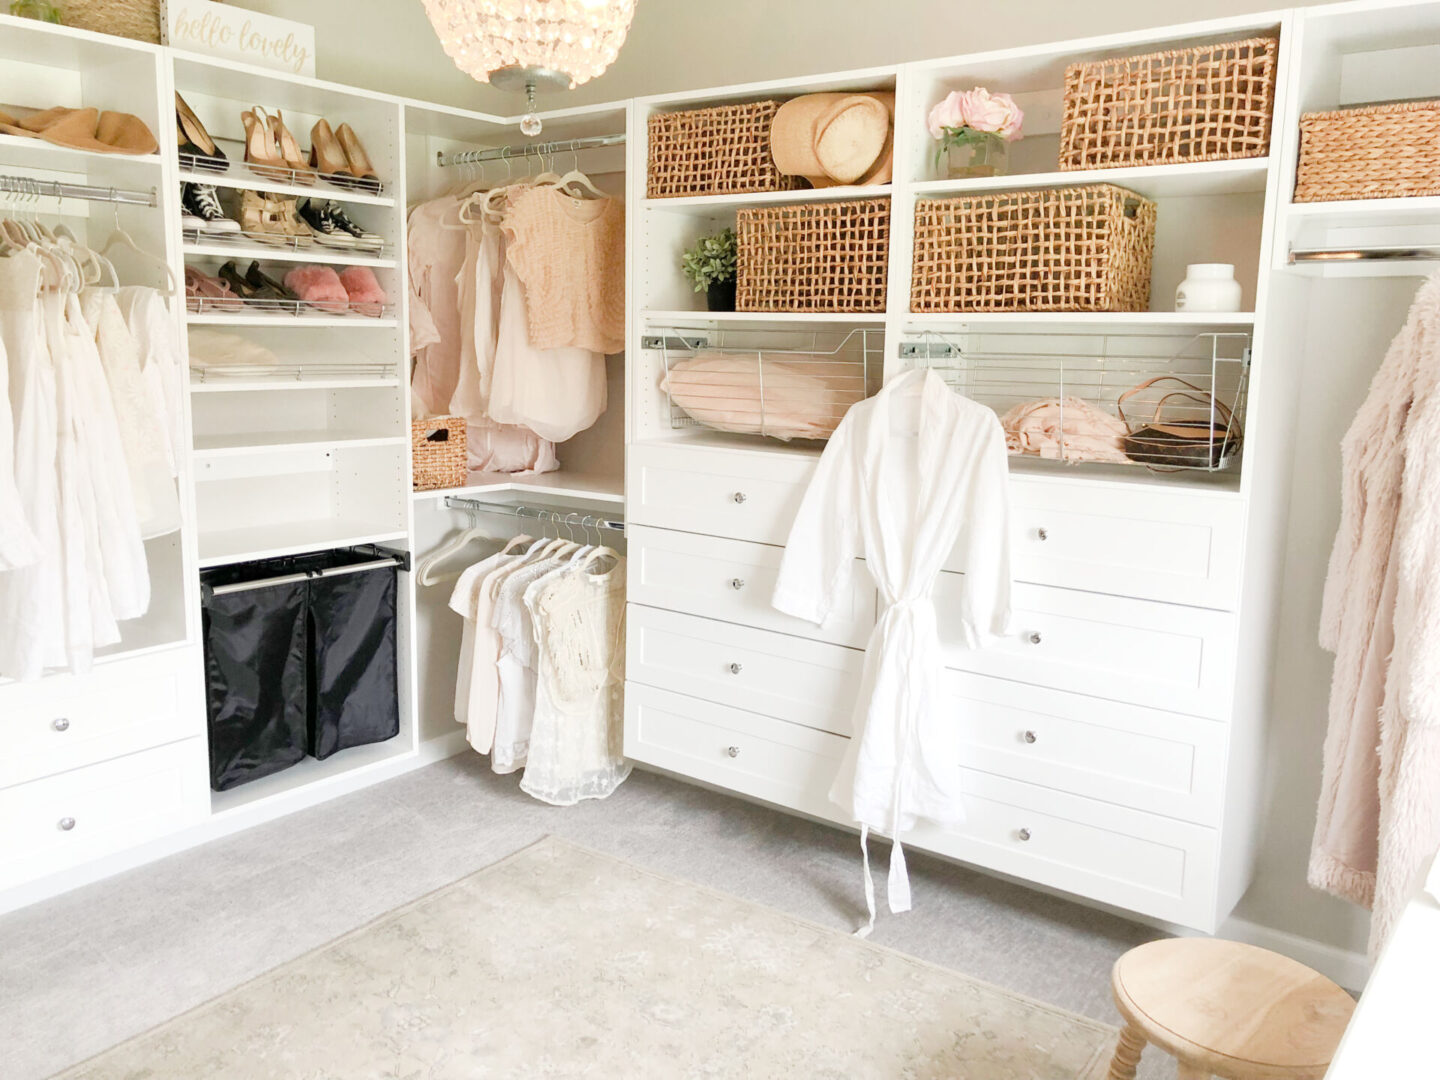 Modular Closets helped me design this pretty closet, office, dressing room which feels calm and inviting - Hello Lovely Studio.